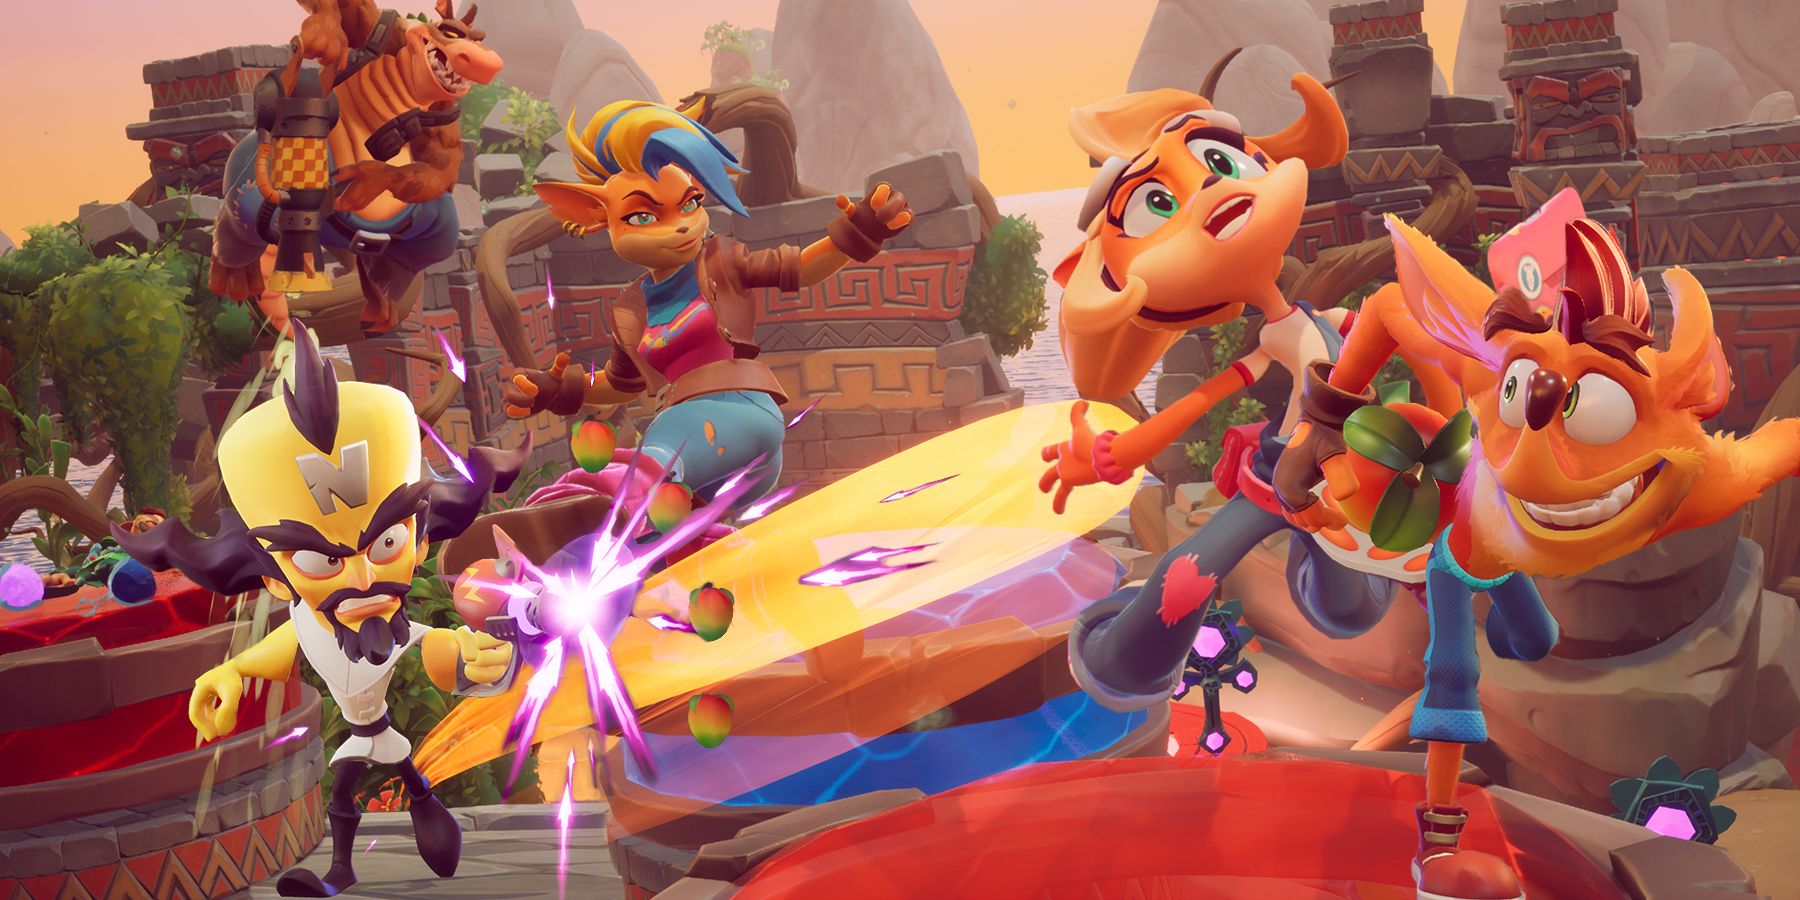 Crash Team Rumble: Characters Fans Hope To See Added In The Future